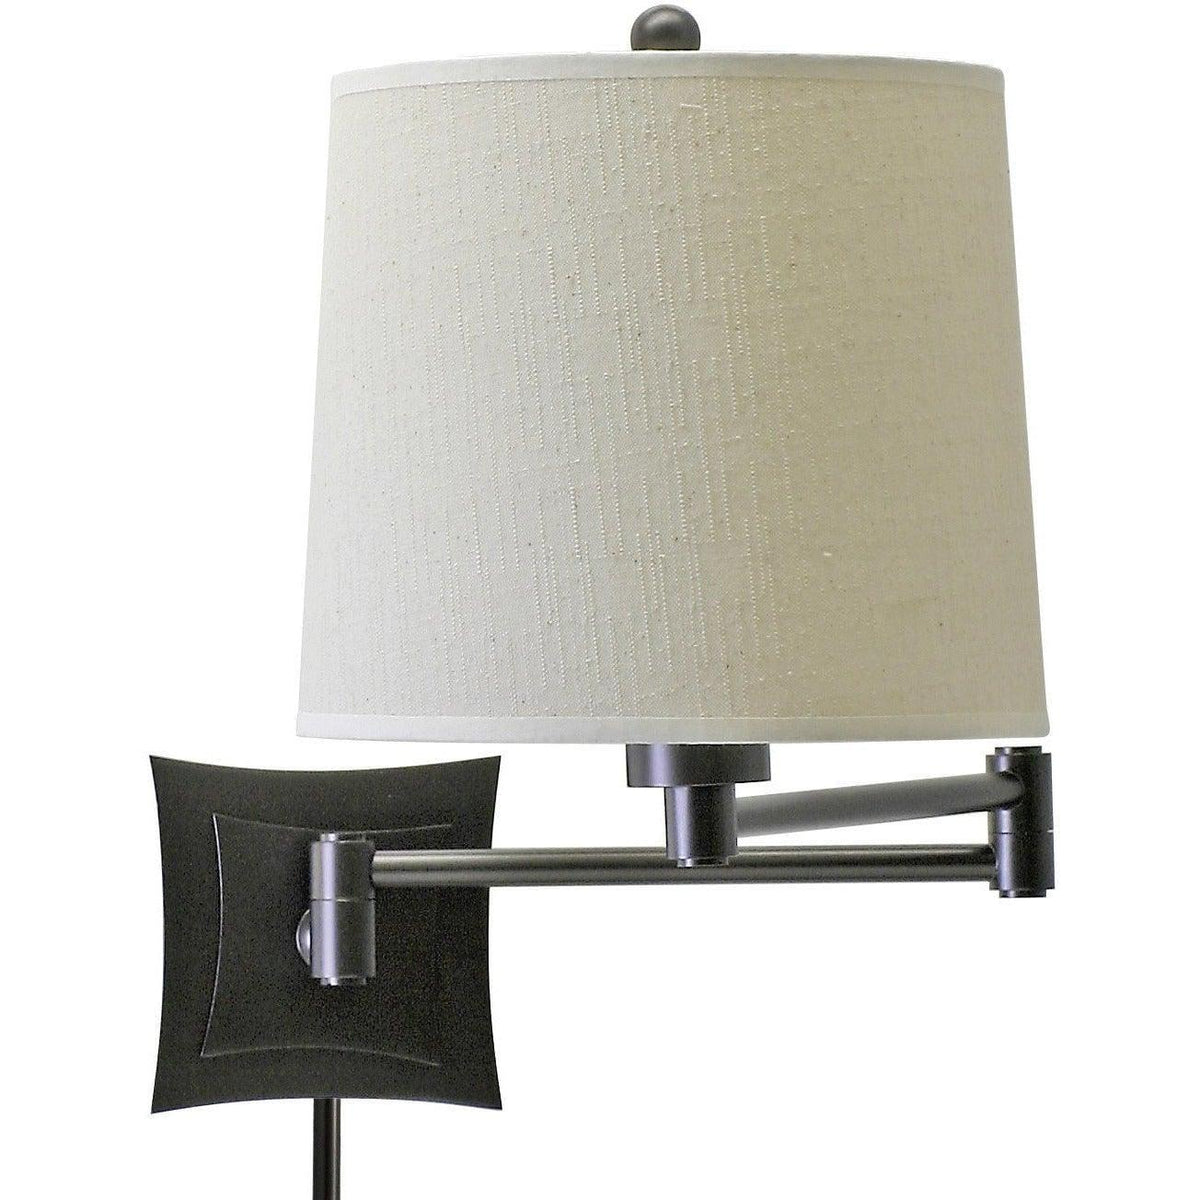 House of Troy - Decorative Wall Swing One Light Wall Sconce - WS752-OB | Montreal Lighting & Hardware